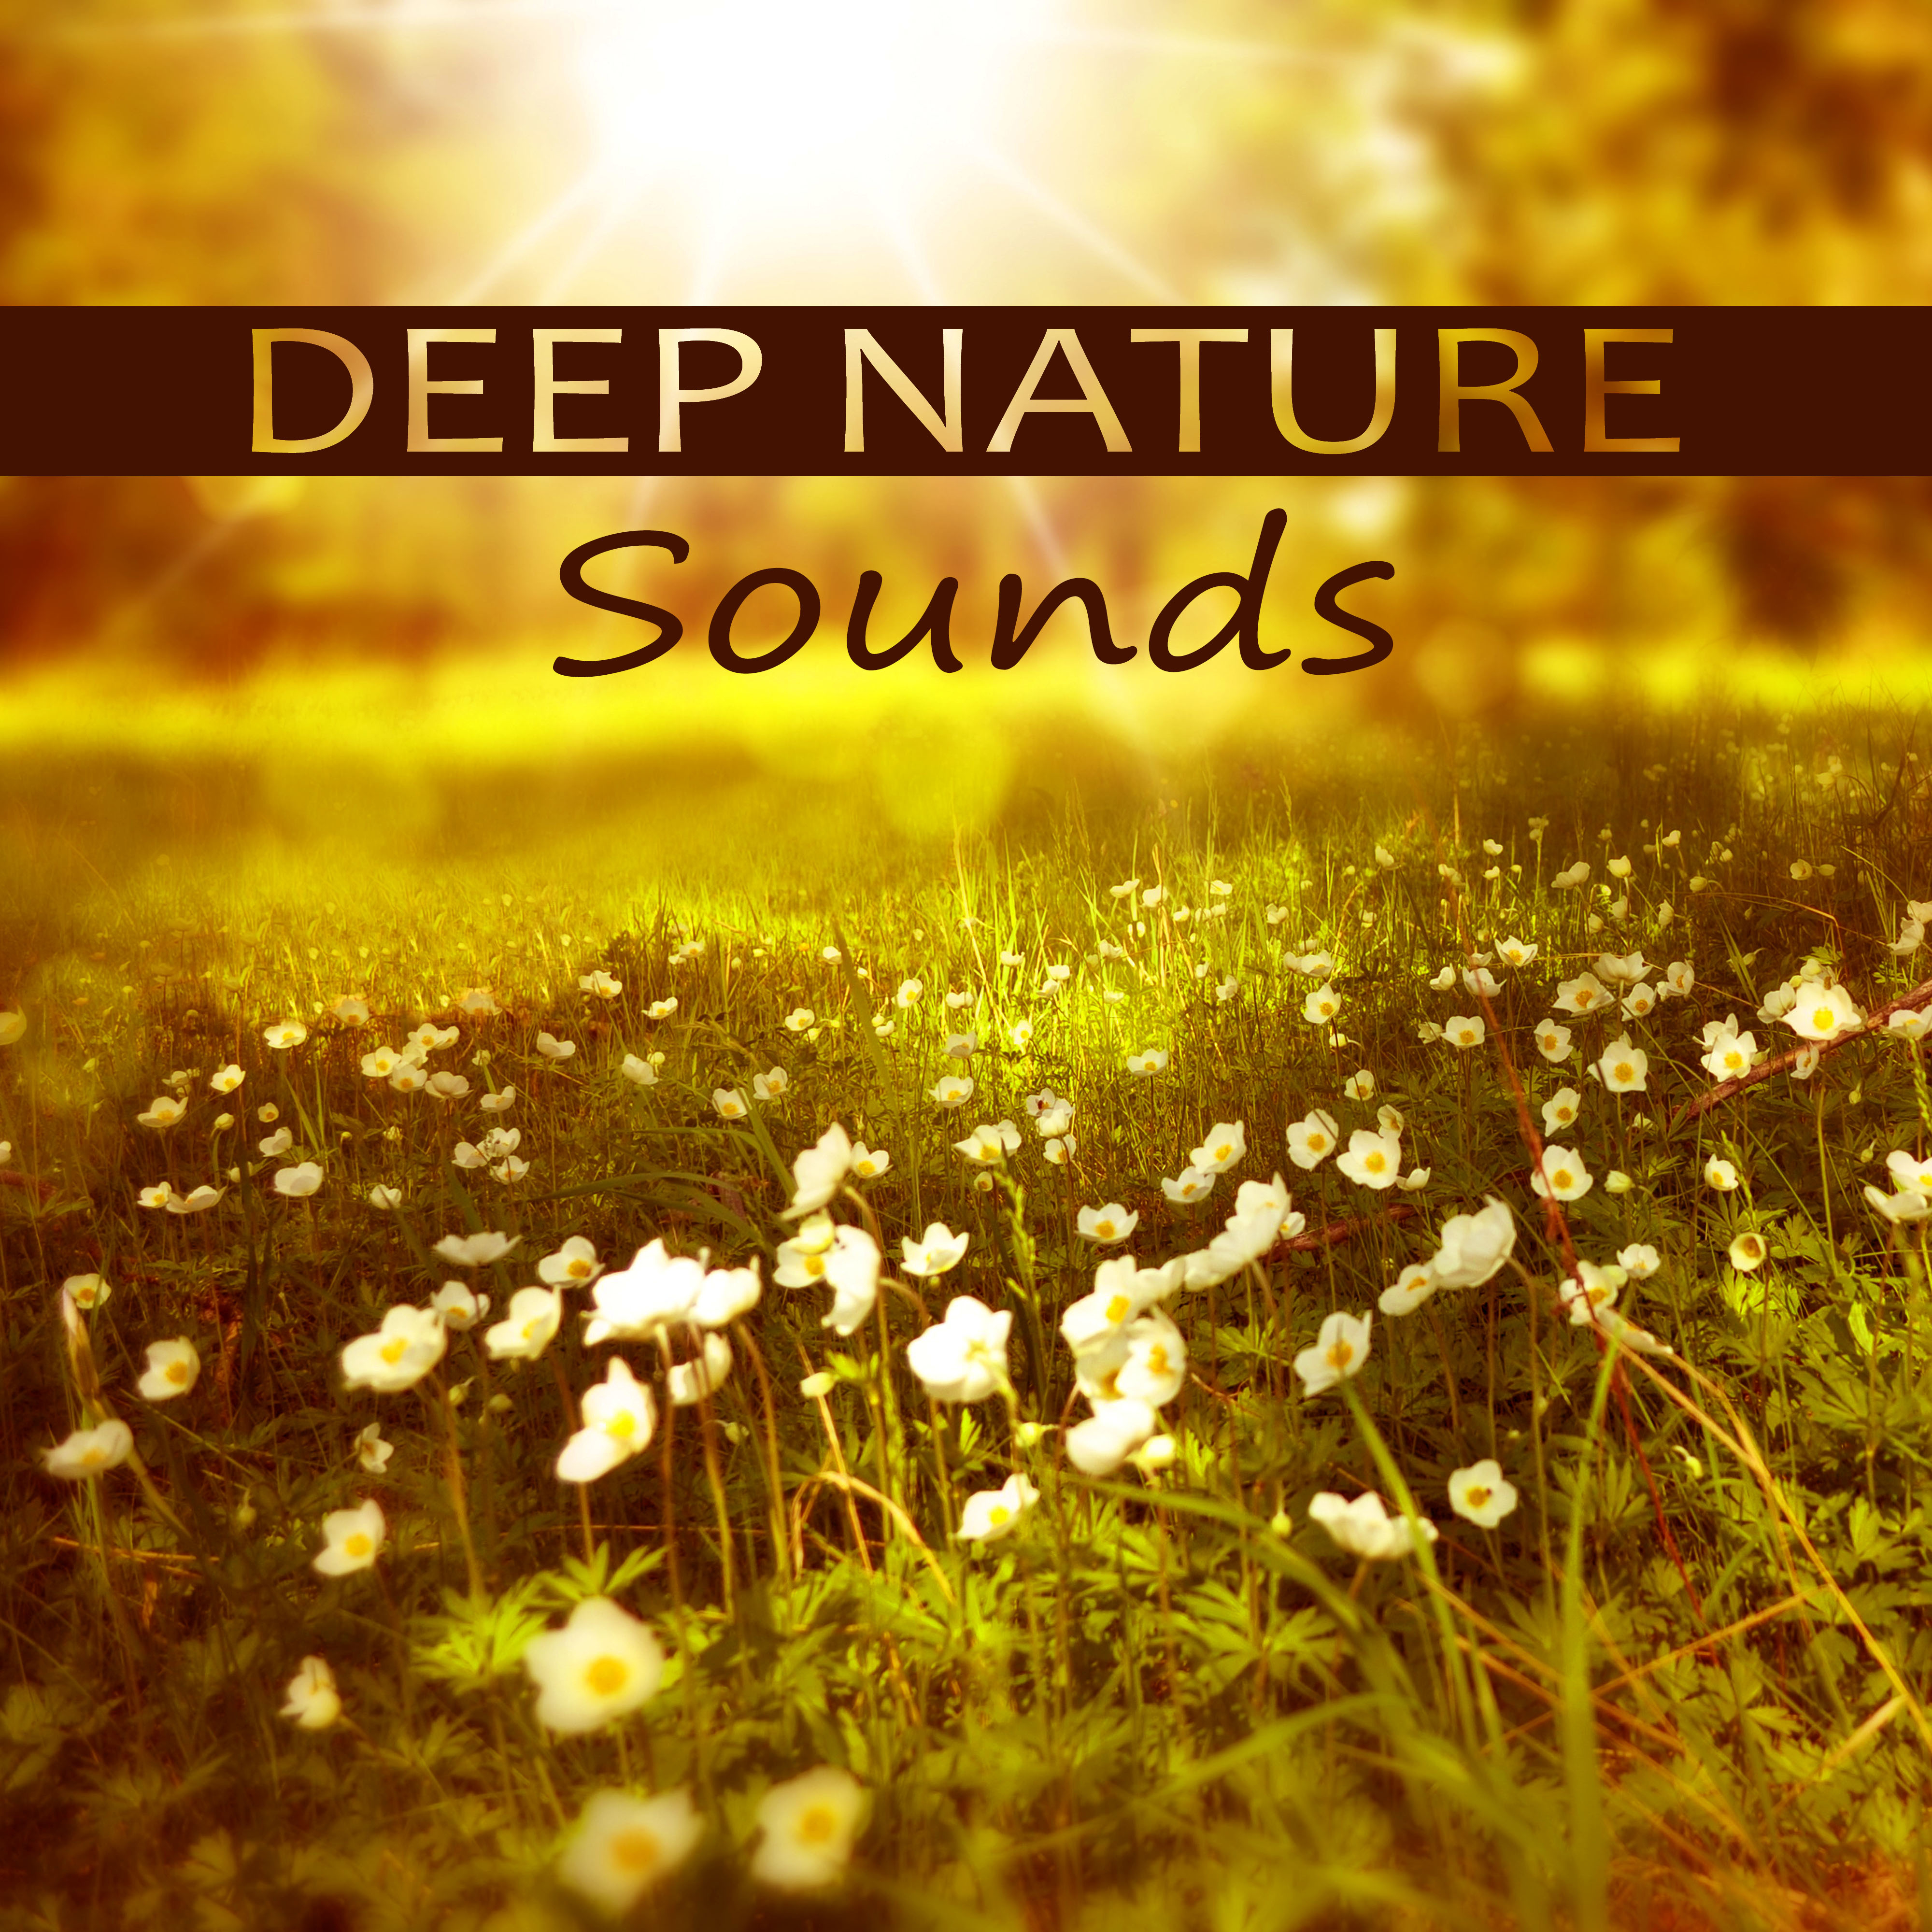 Deep Nature Sounds  Calm Sounds for Meditation, Soft Music for Relaxation, Nature Sounds, Inspiring Music